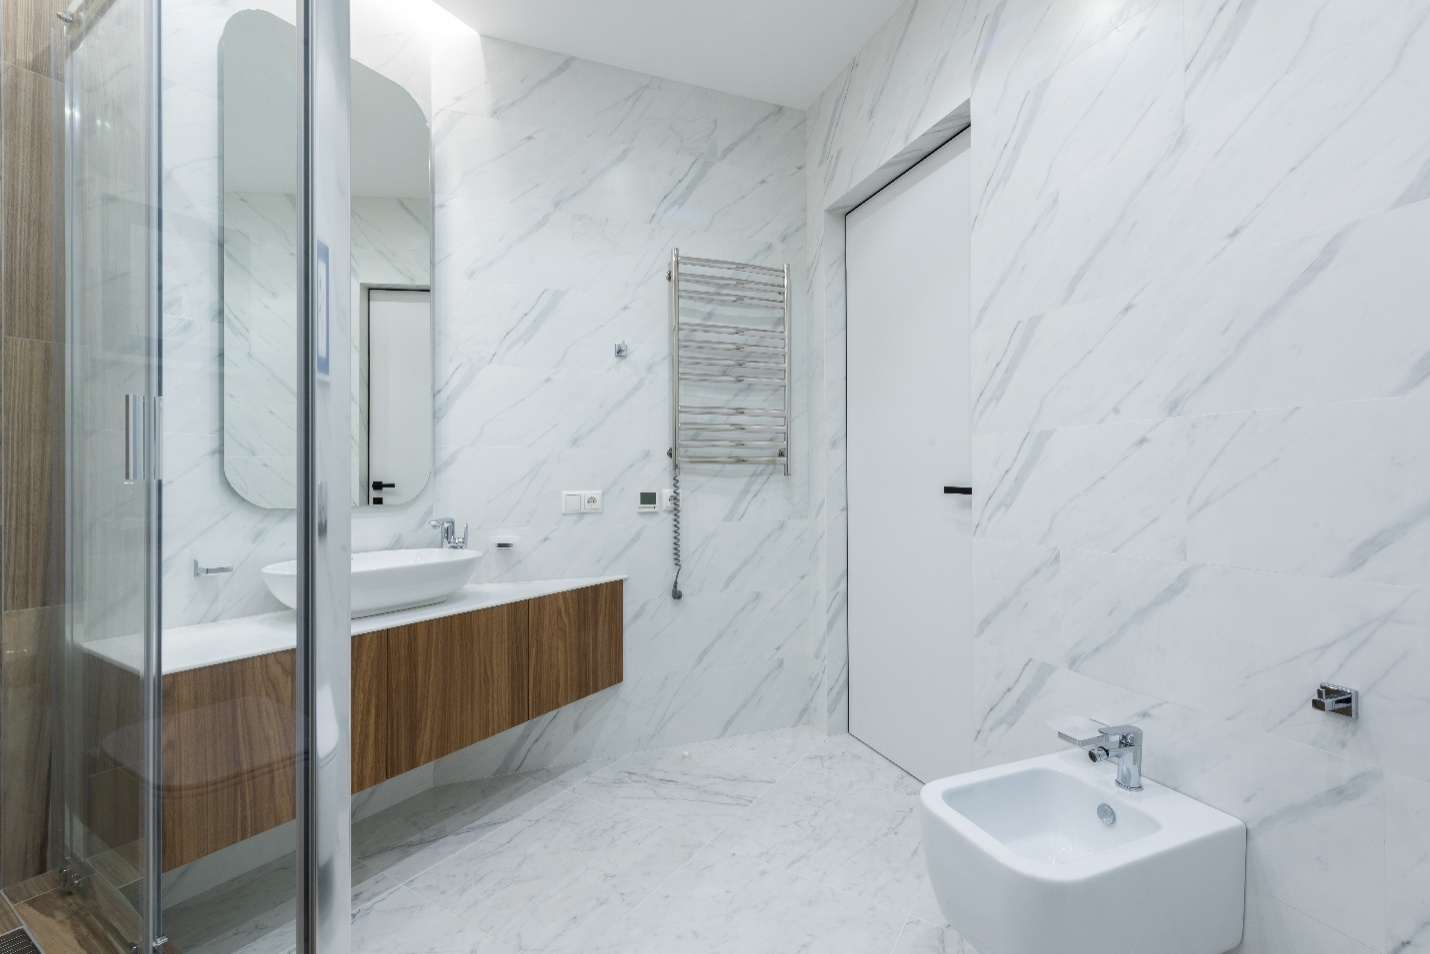 Modern bathroom after a completed renovation project